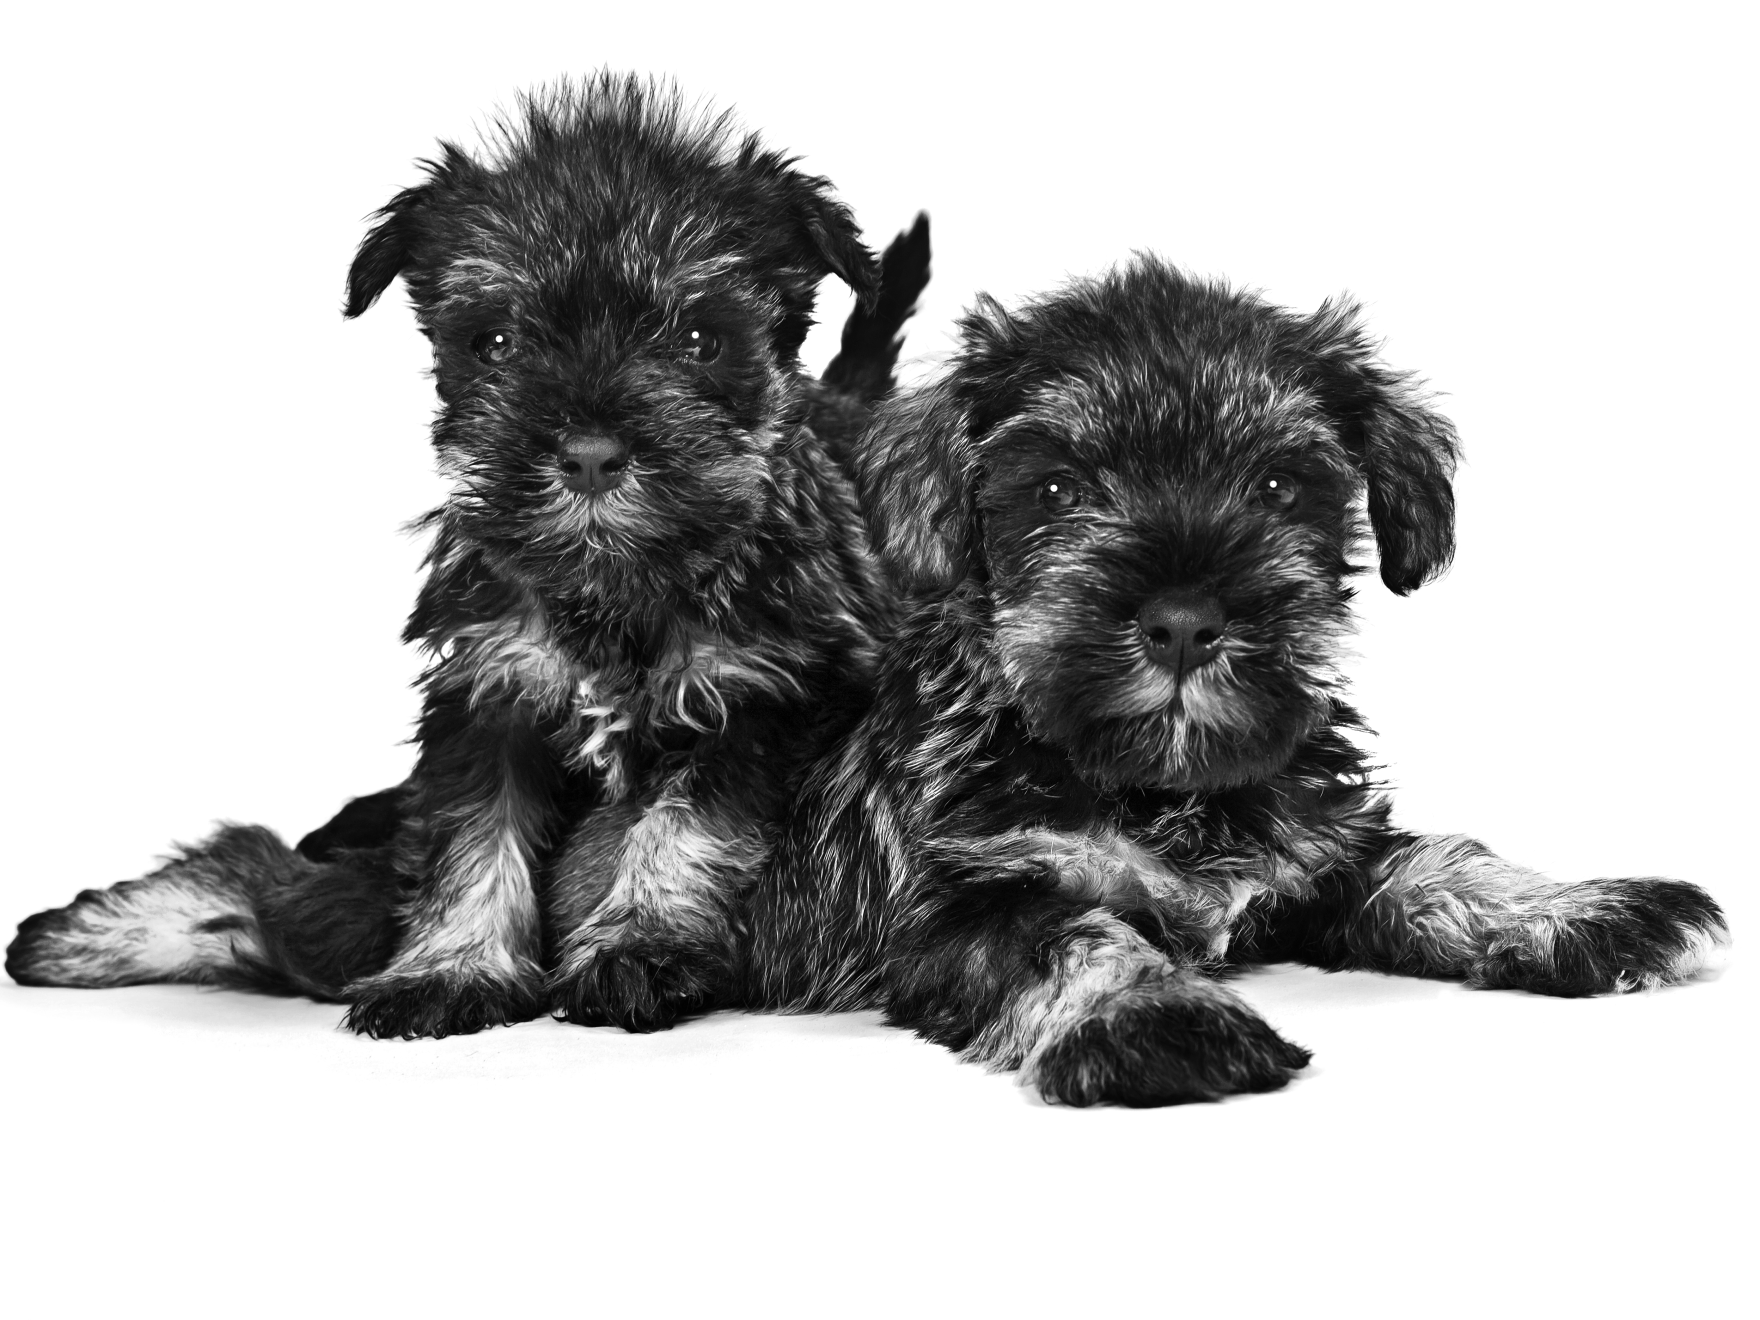 Black and white portrait of two Miniature Schnauzer puppies lying down